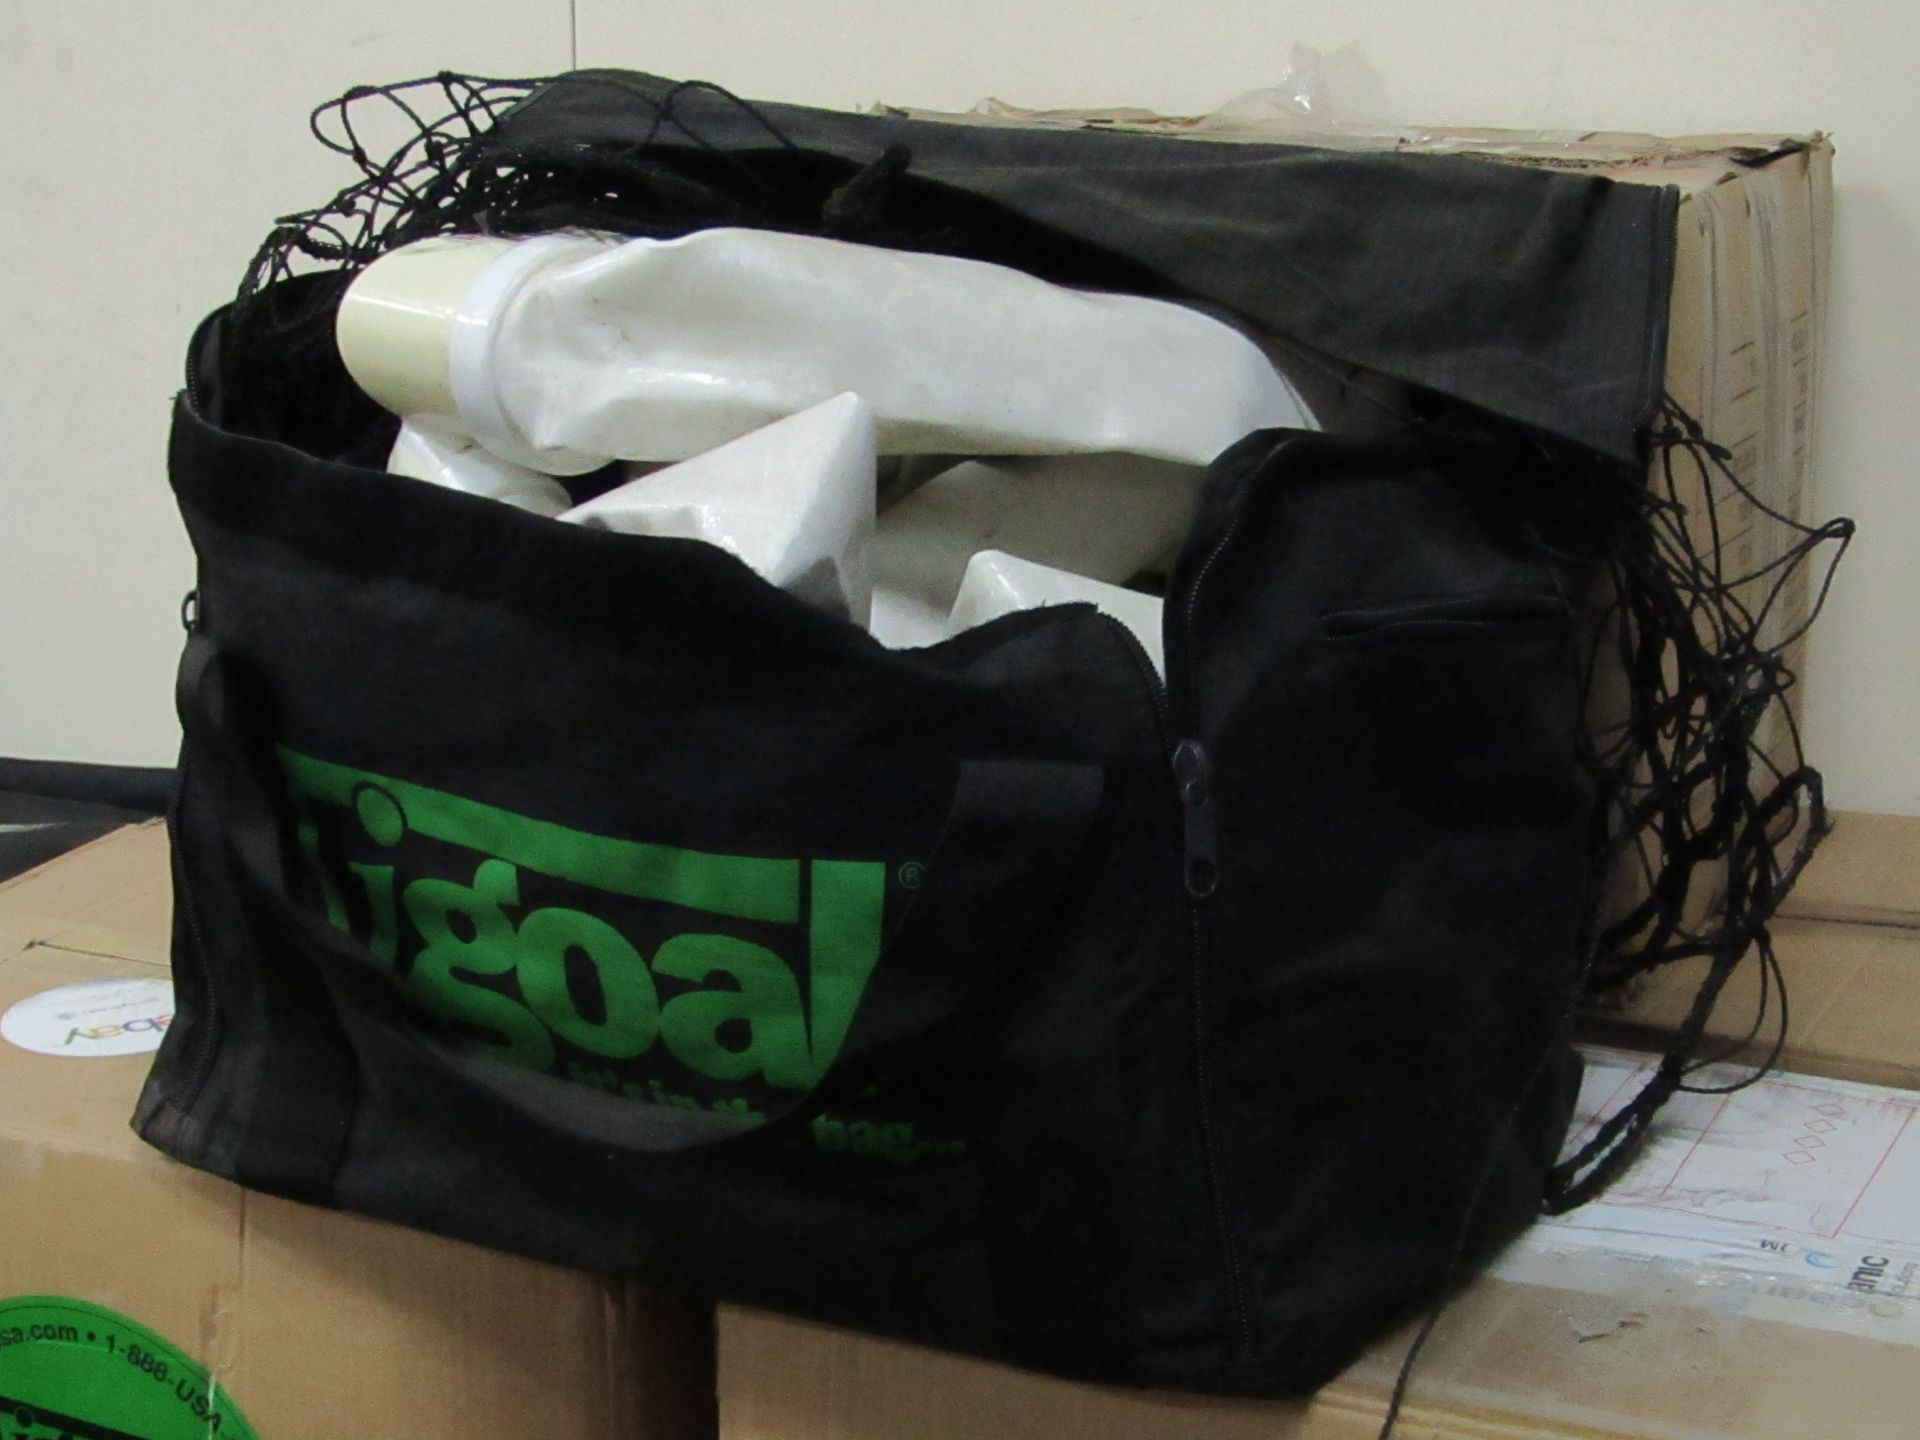 iGoal 8x5 Home Goal with rigit air technology in carry bag, unchecked - Image 2 of 2